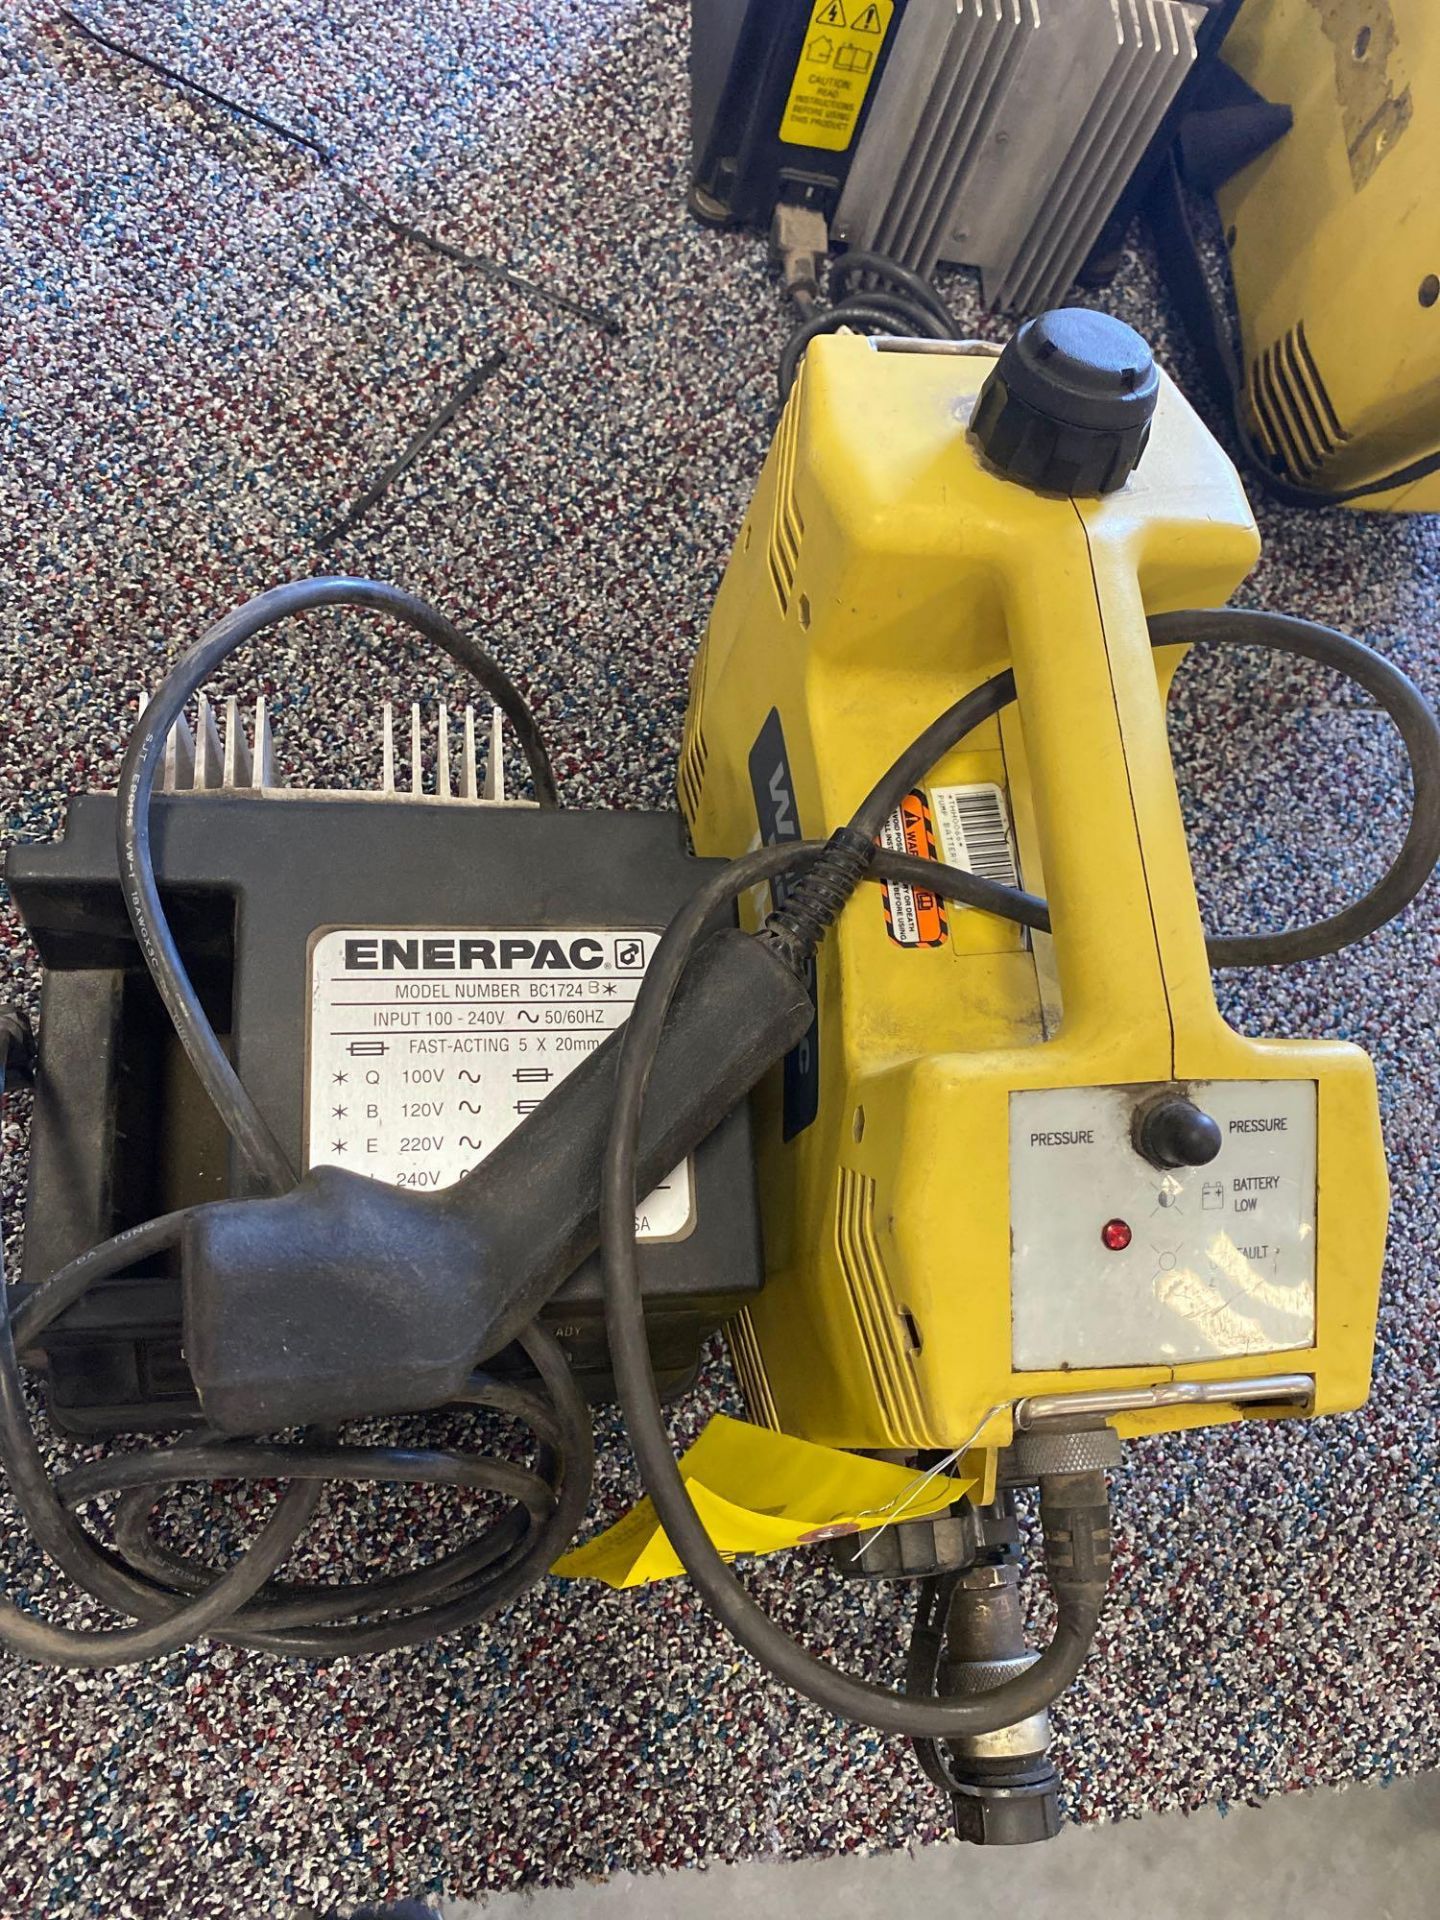 ENERPAC PBR12001B HYDRAULIC PUMP AND BATTERY CHARGER - Image 13 of 16